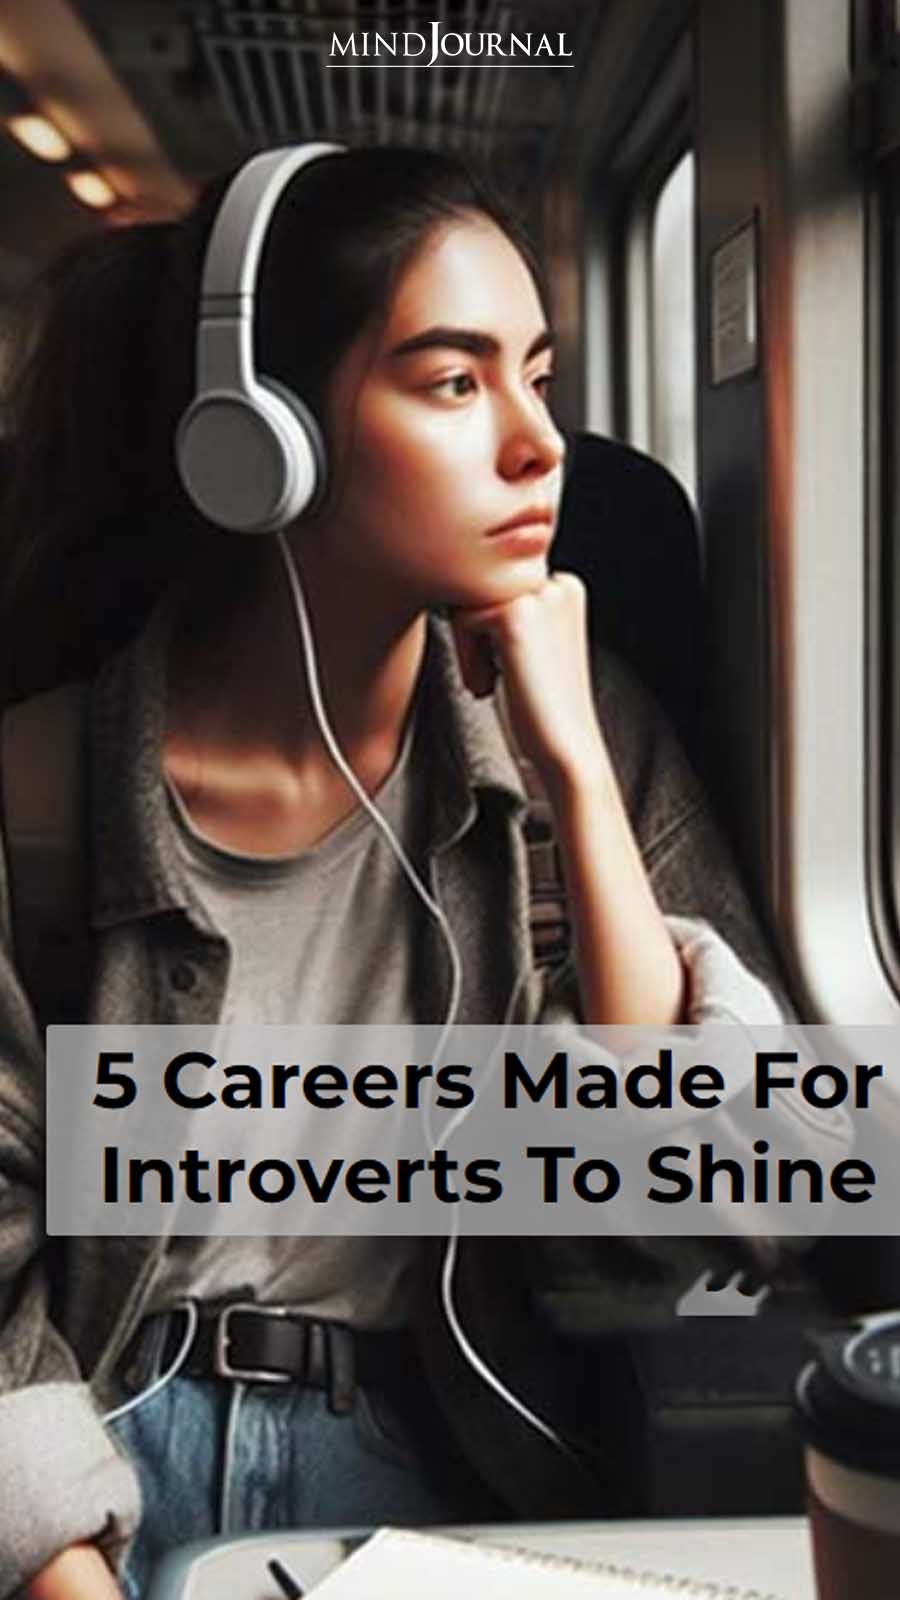 5 Careers Made For Introverts To Shine